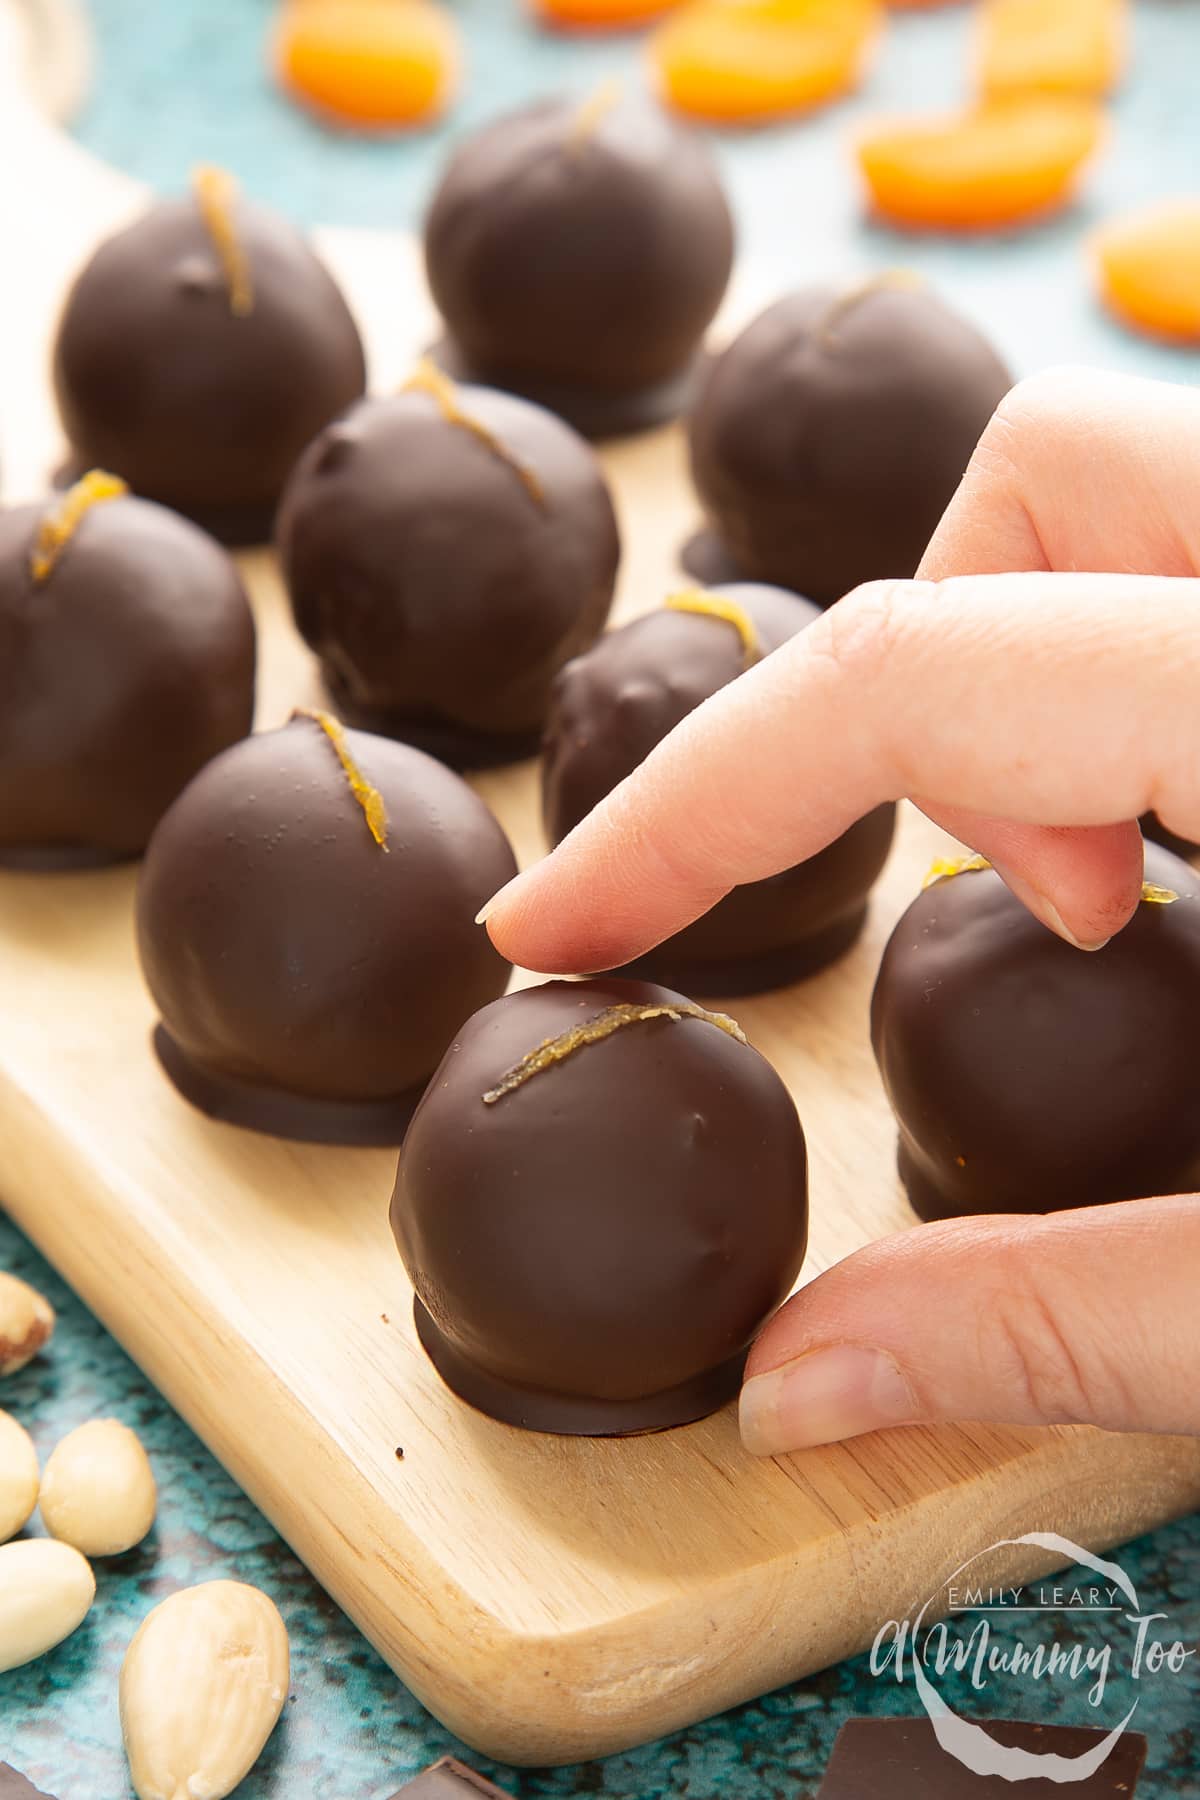 Chocolate apricot balls arranged on a wooden board. Dried apricots, blanched almonds and squares of dark chocolate surround the board. A hand reaches in to take one. 